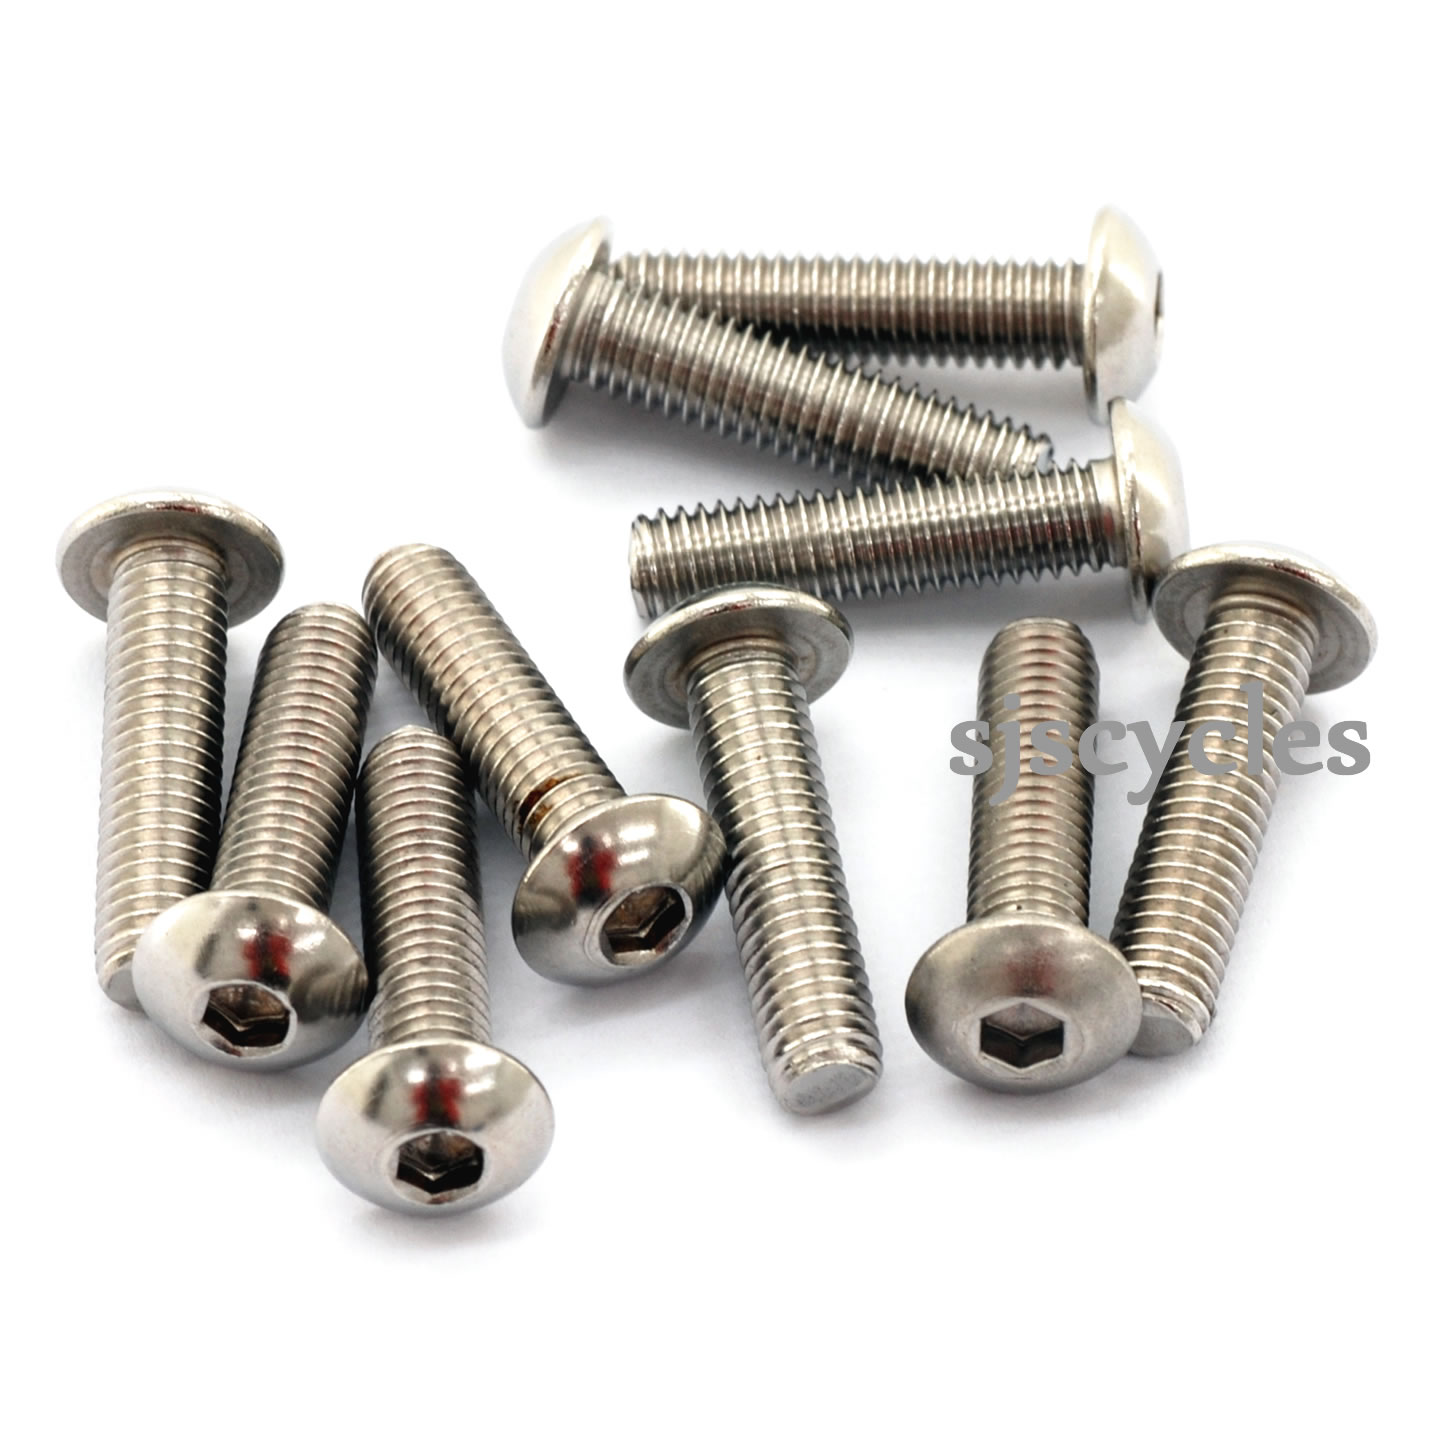 M5 Button Head Screws Nuts & Washers A2 Stainless Steel Dome Head Bolts